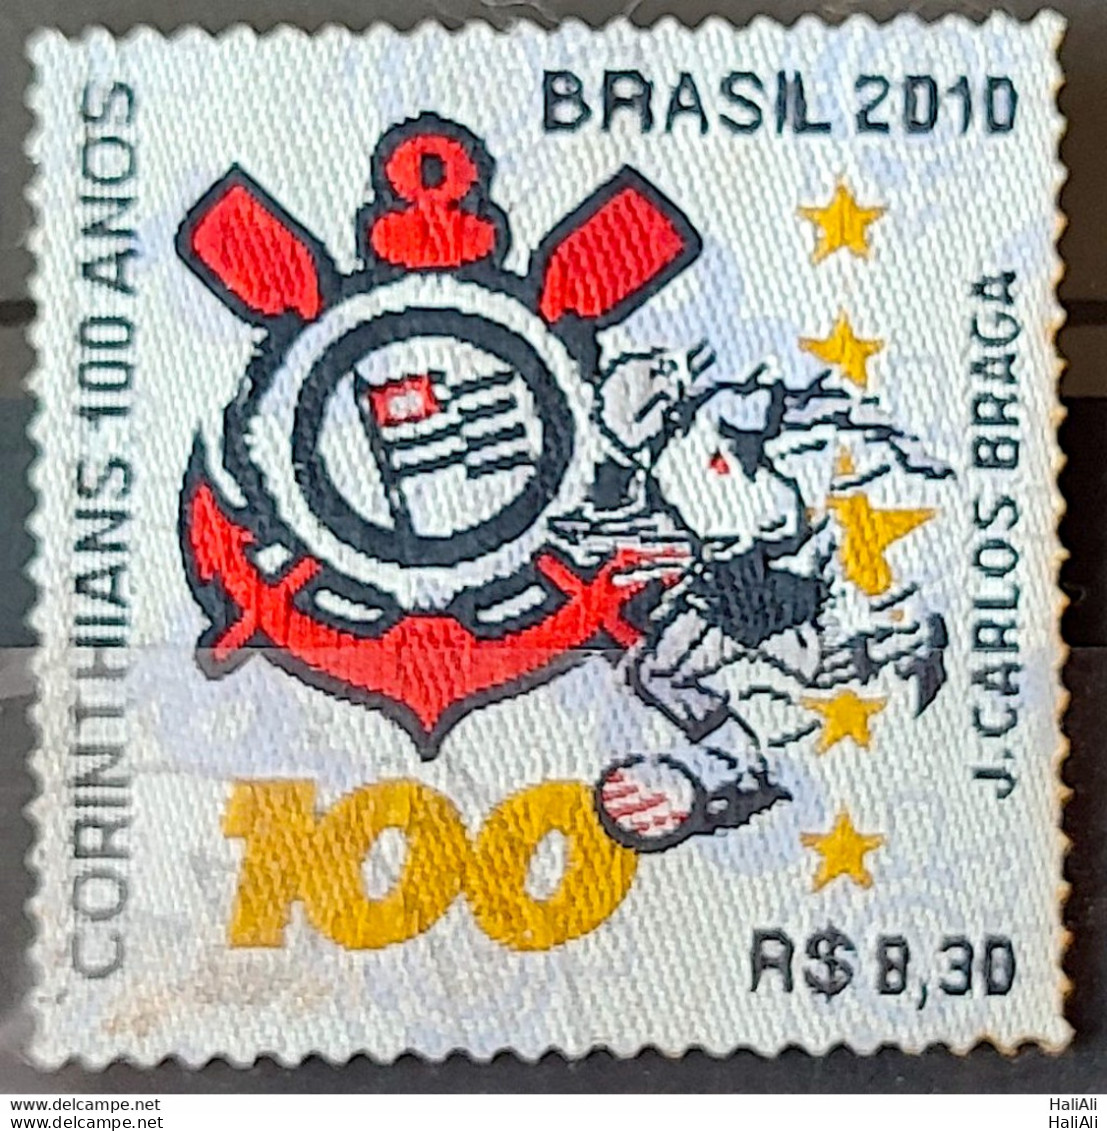 C 3028 Brazil Stamp 100 Years Of Corinthians Footaball Fabric Stamp 2010 Circulated 1 - Used Stamps